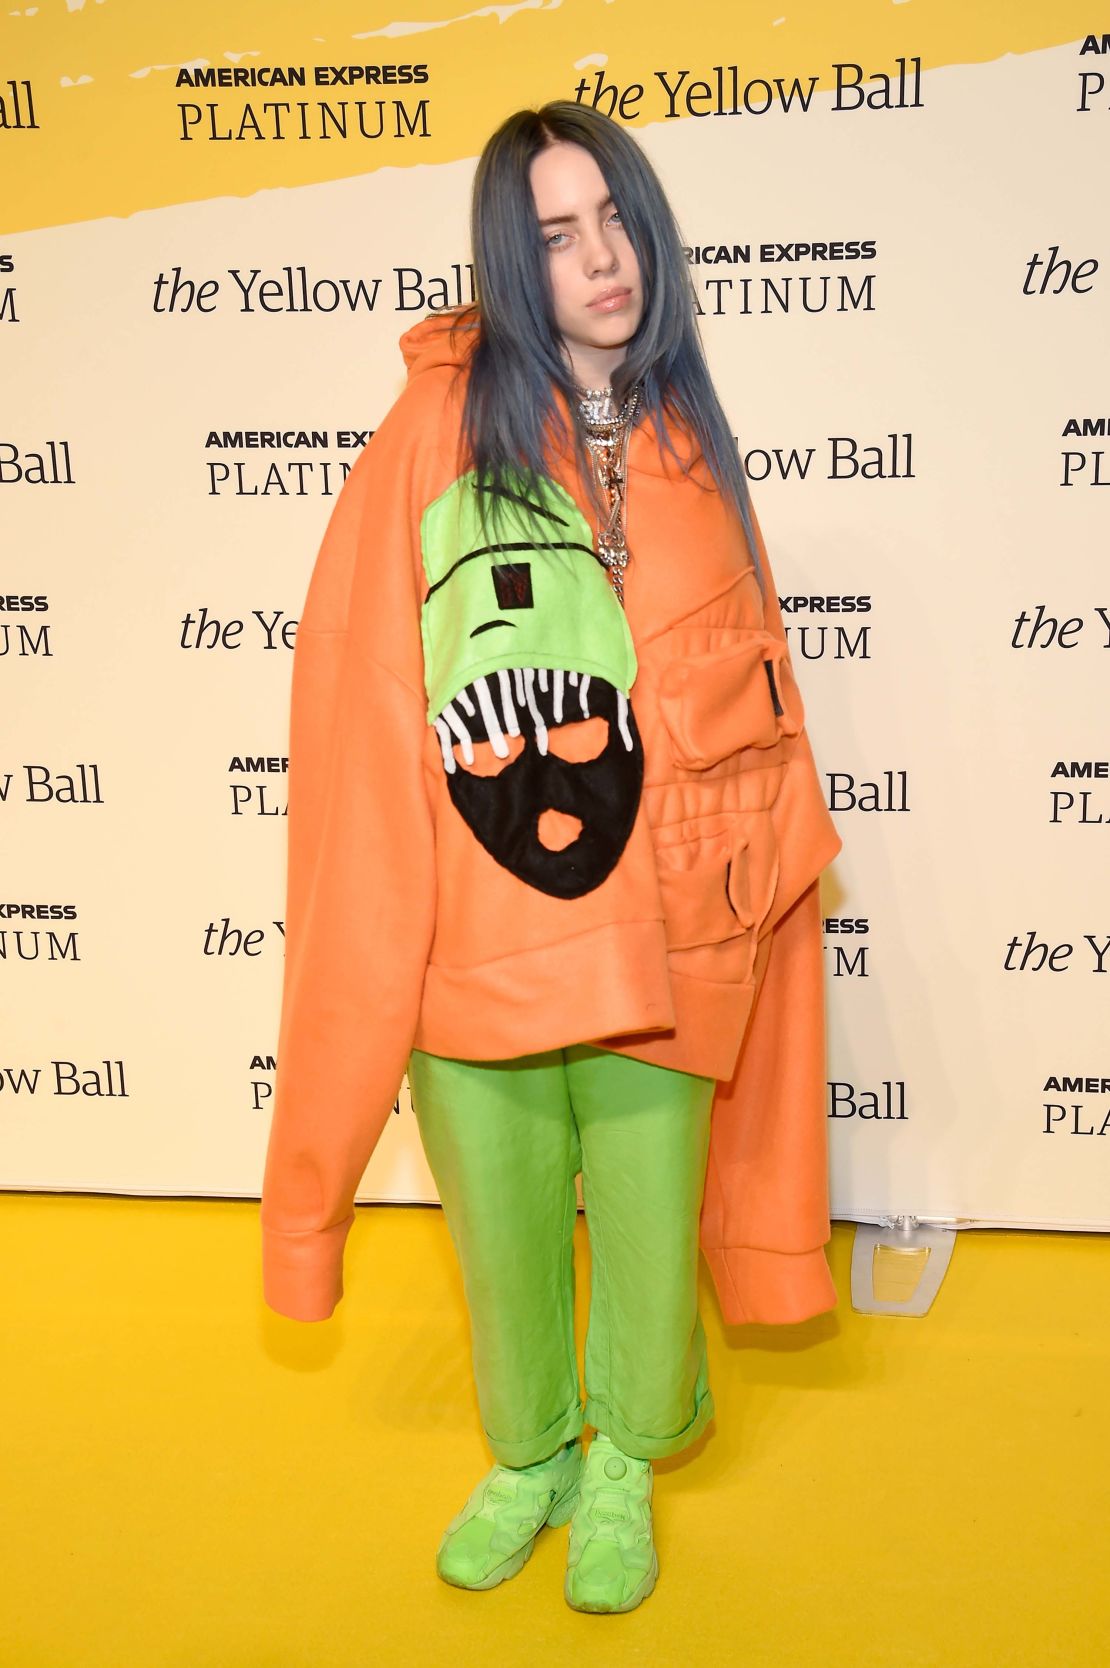 Billie Eilish poses at the Yellow Ball on September 10, 2018 in New York, New York.  